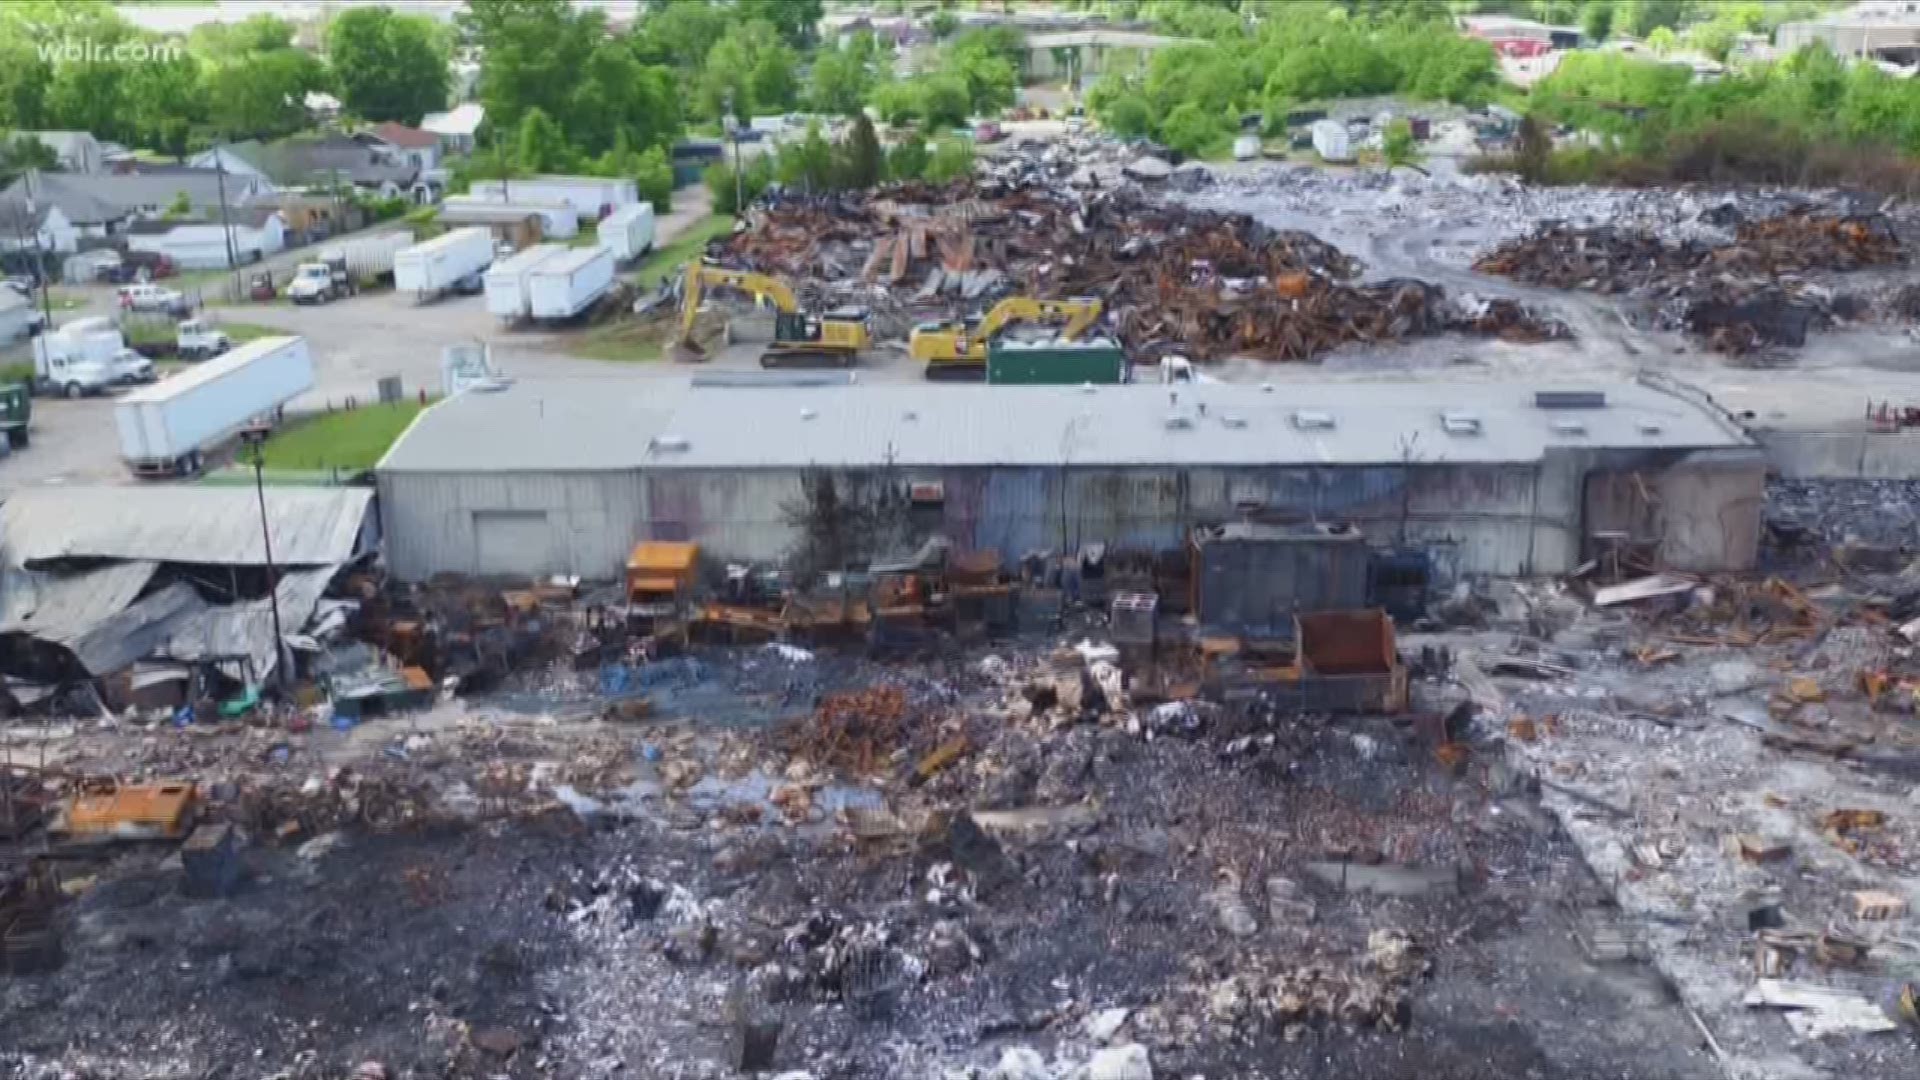 The City of Knoxville said the Codes Enforcement department plans to issue an emergency order to repair or demolish the Fort Loudon Waste and Recycling center. A massive fire earlier this month at the site sent smoke into the air that could be seen for miles.